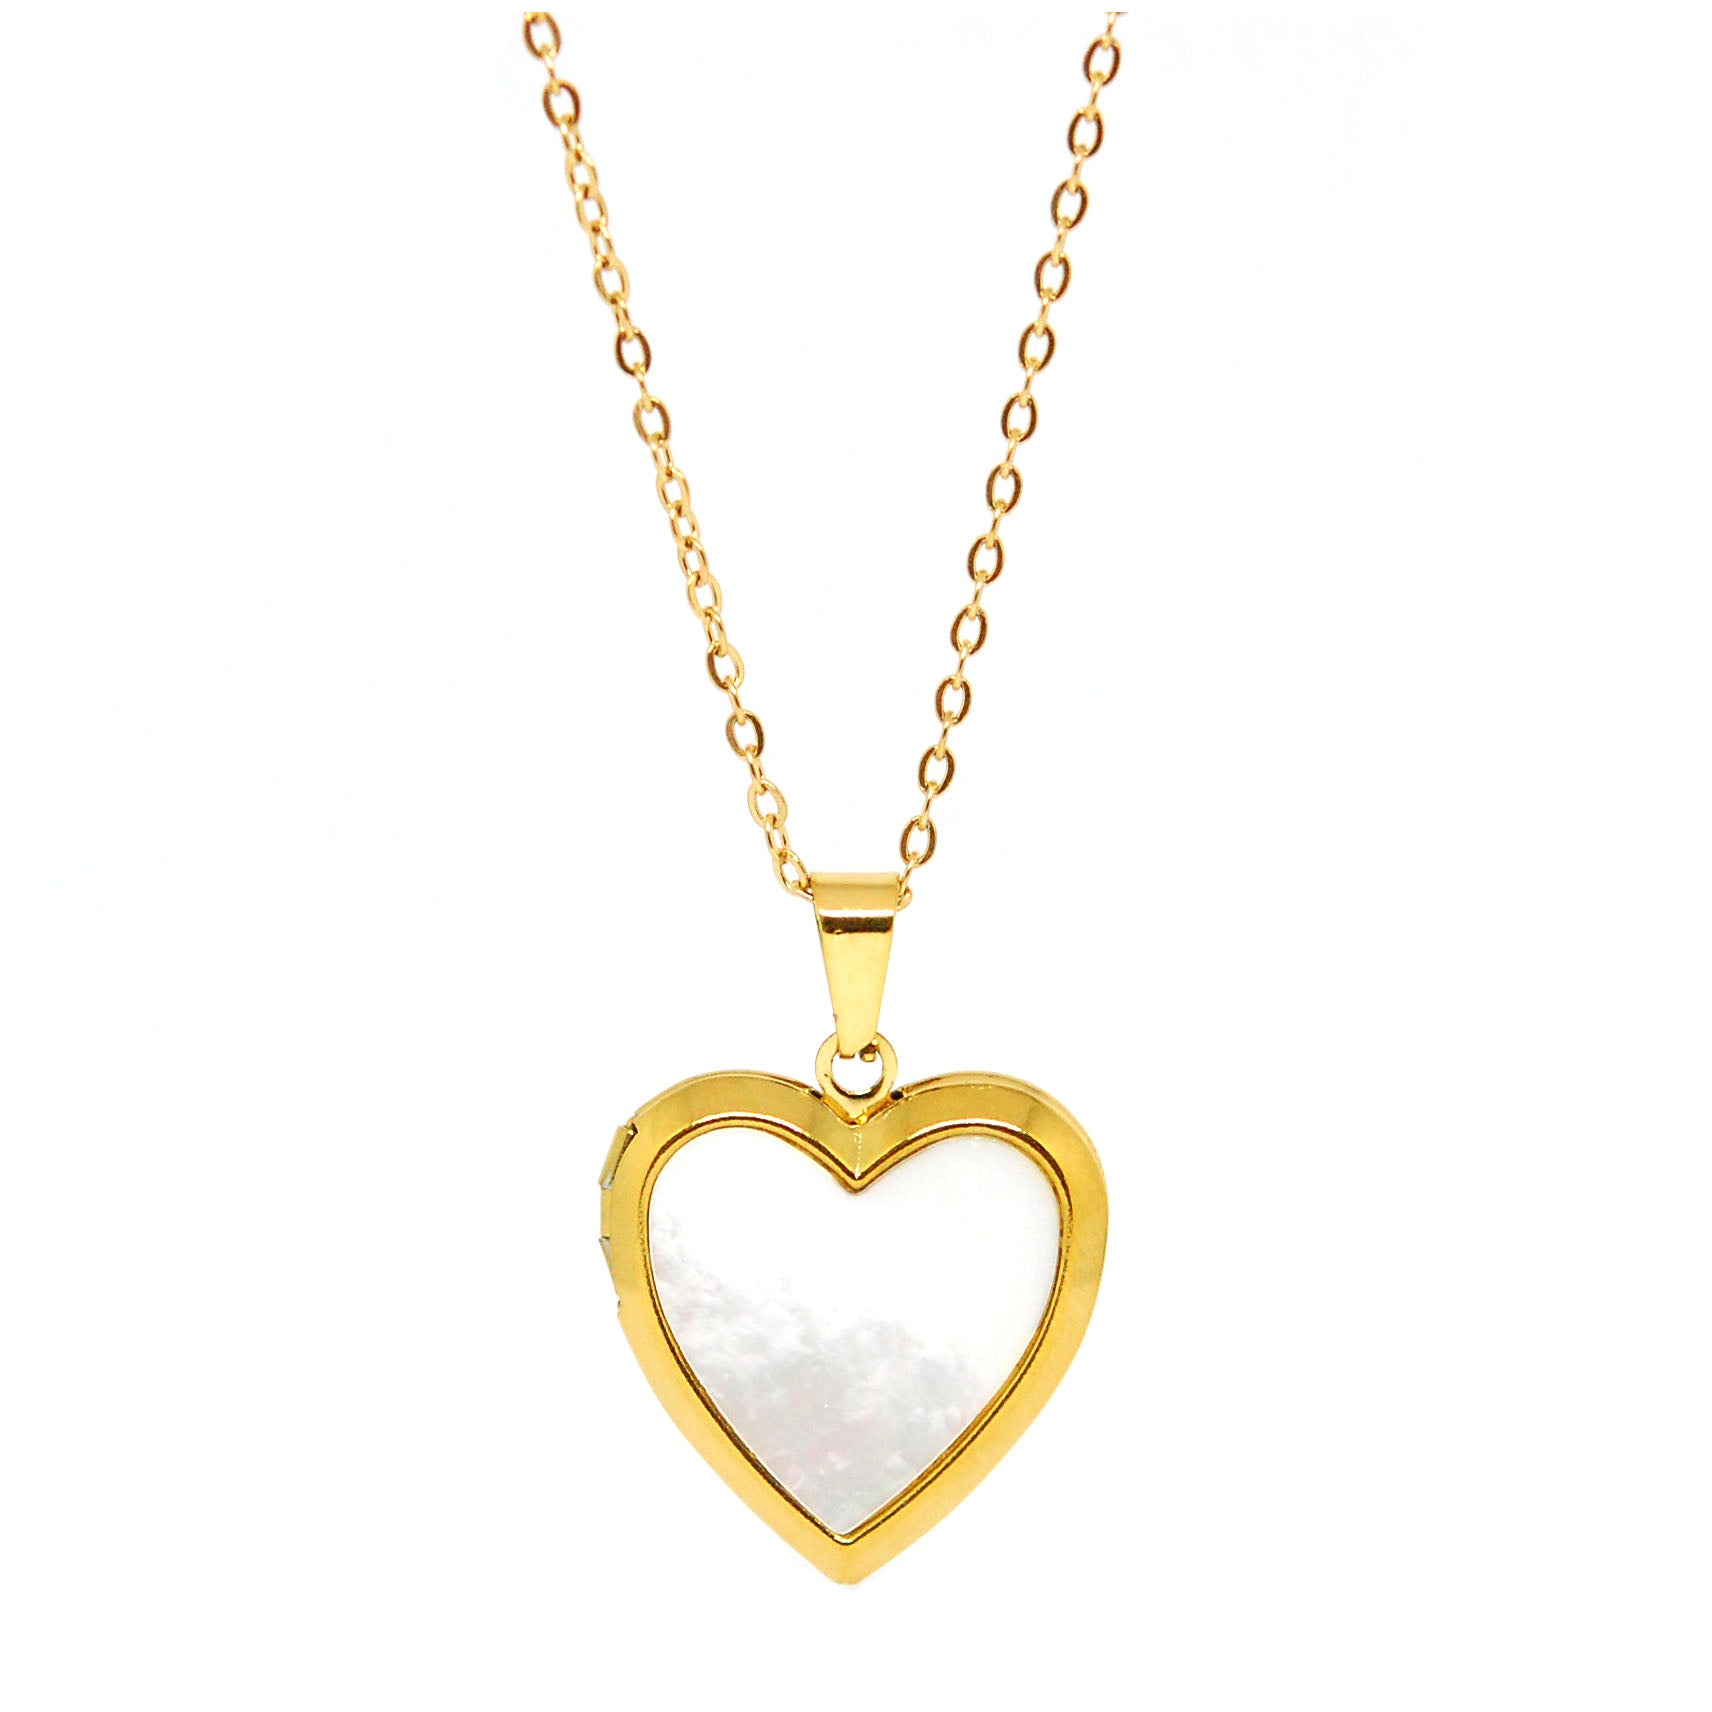 ESN 7631: Gold Plated MOP Heart Open-Able Locket Necklace w/ IPG Med Link Chain